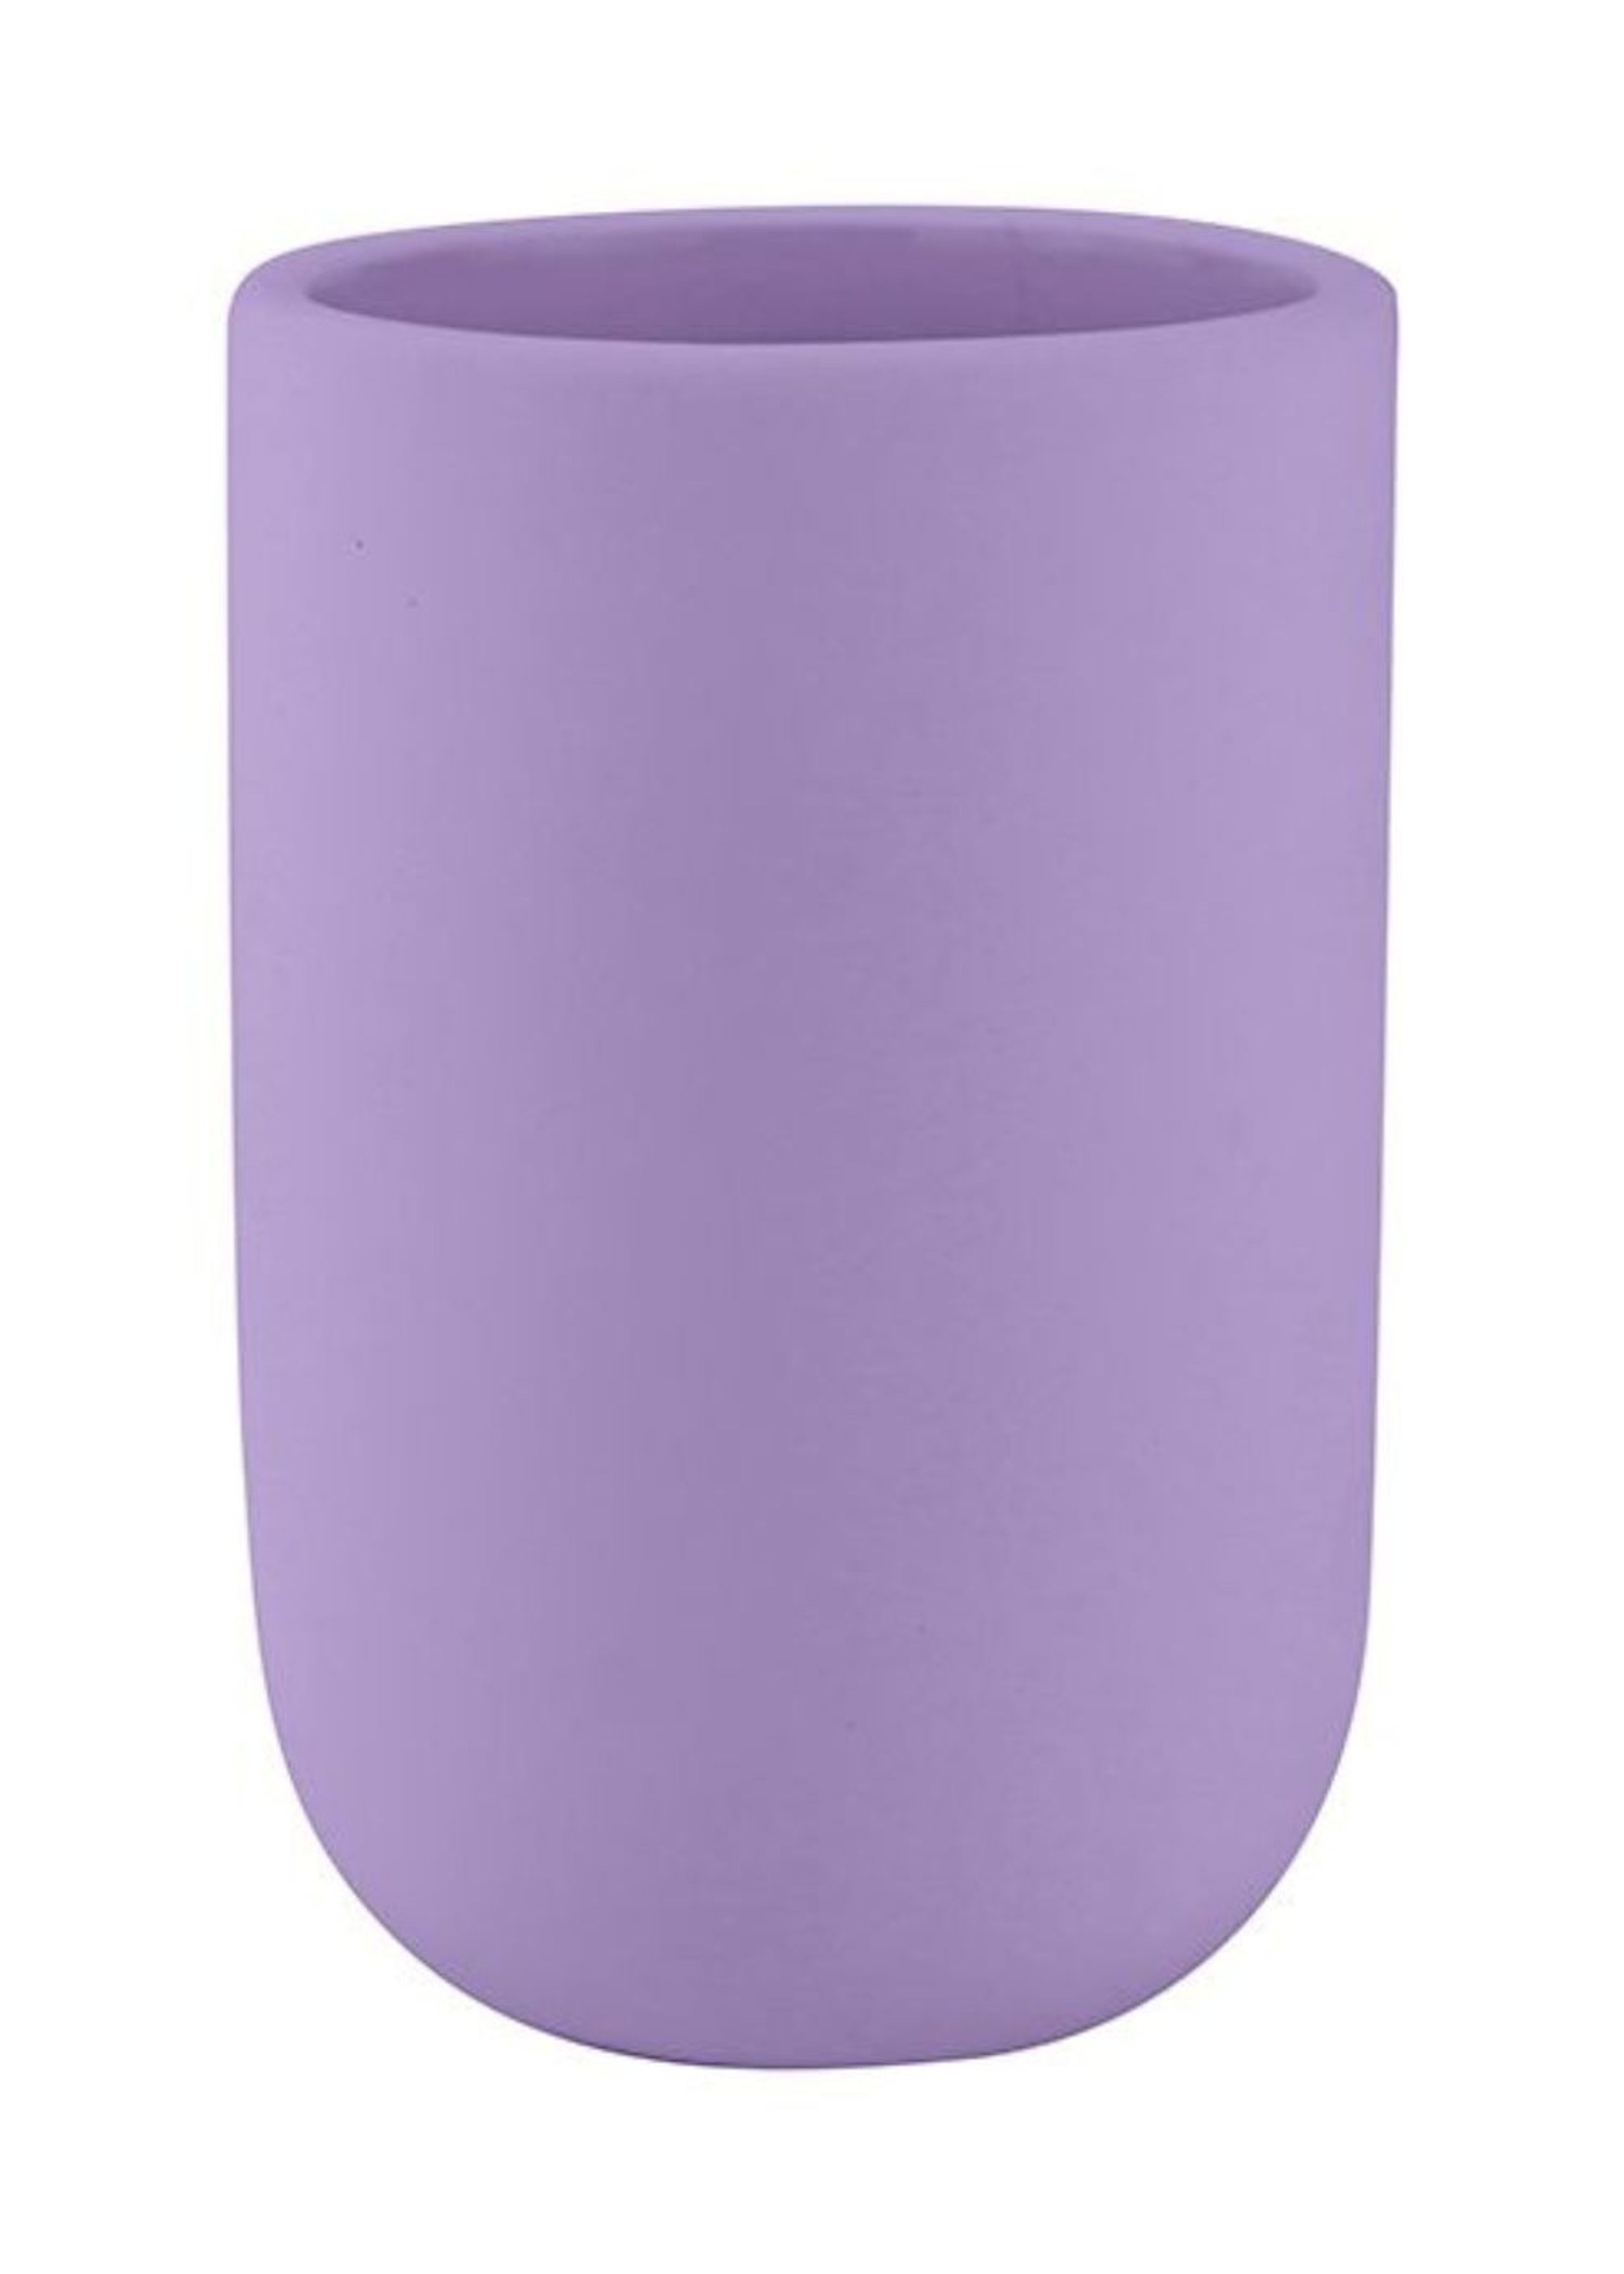 Mette Ditmer - Support - LOTUS Tumbler  - Light lilac